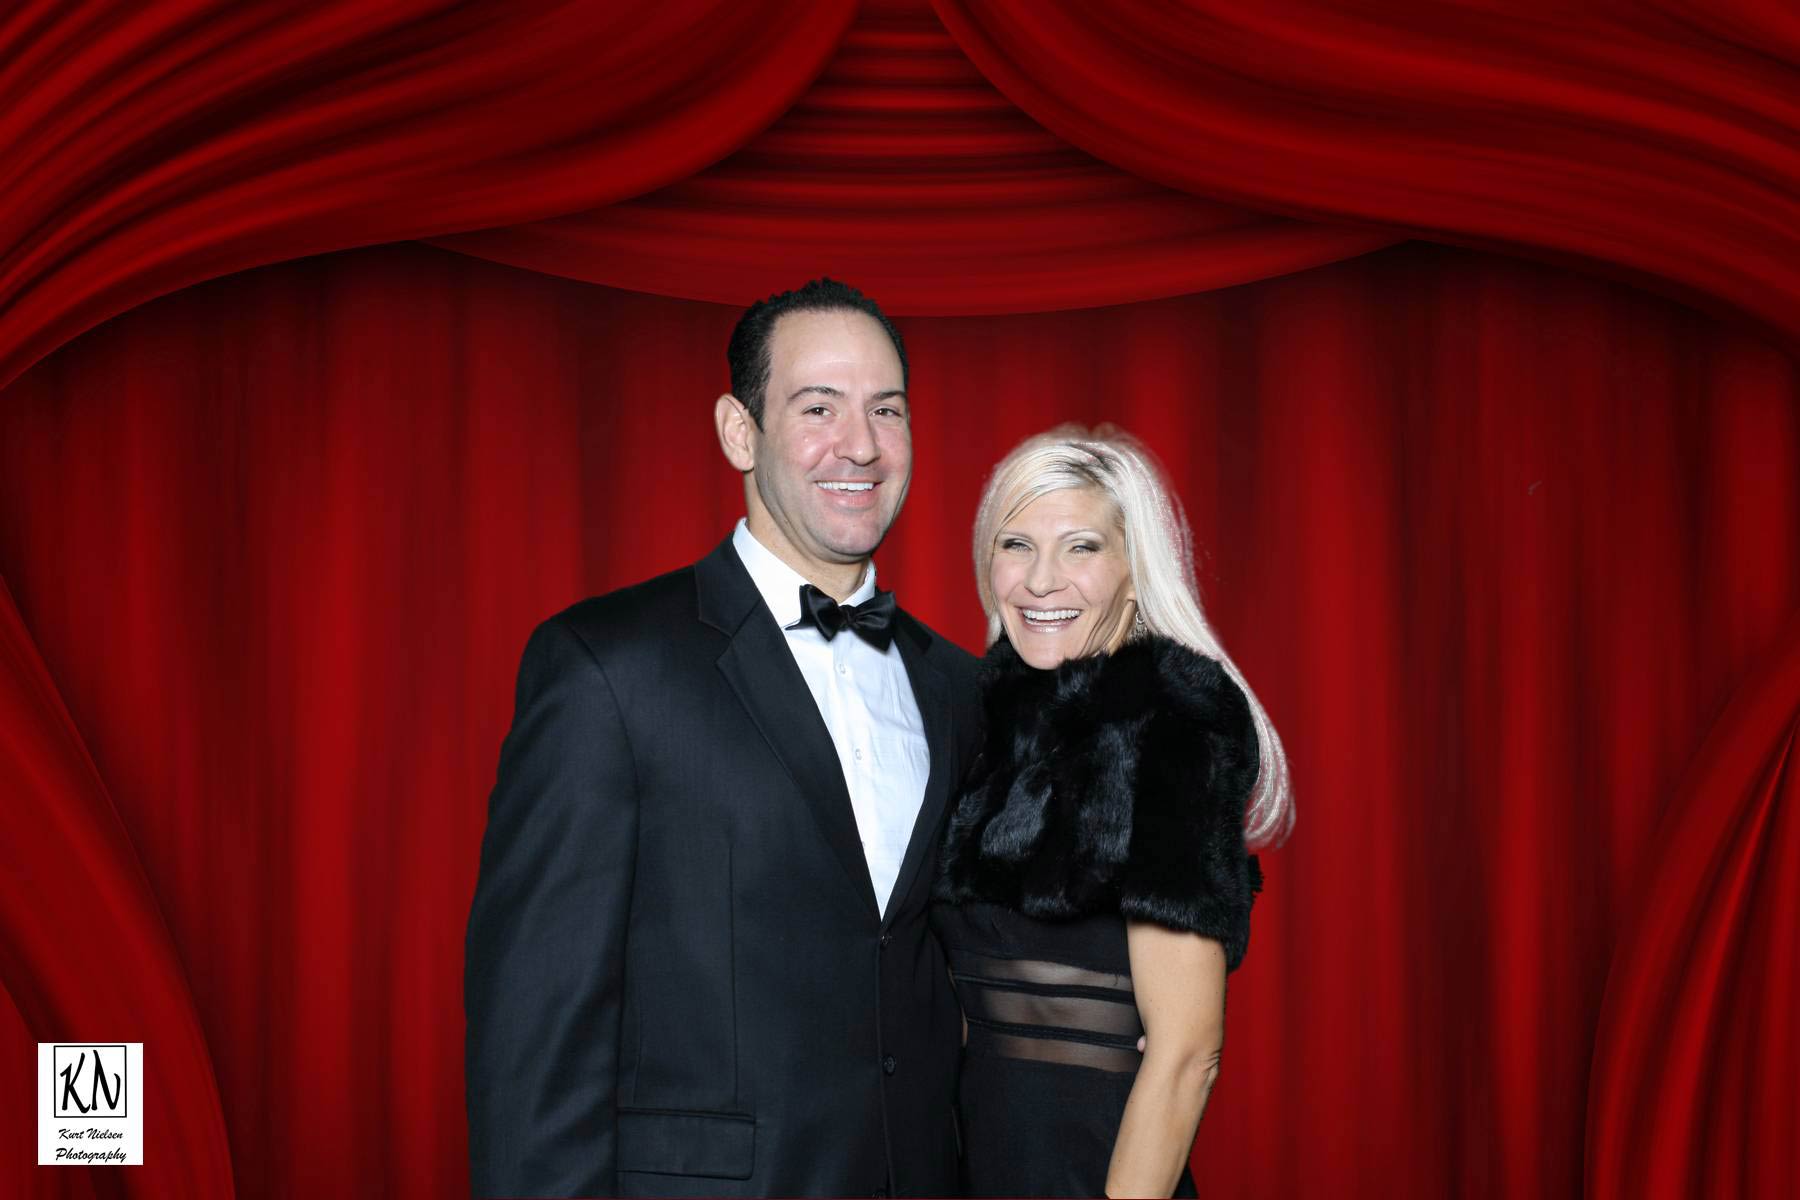 tony geftos from 13abc posing with his wife in our green screen photo booth for a charity gala